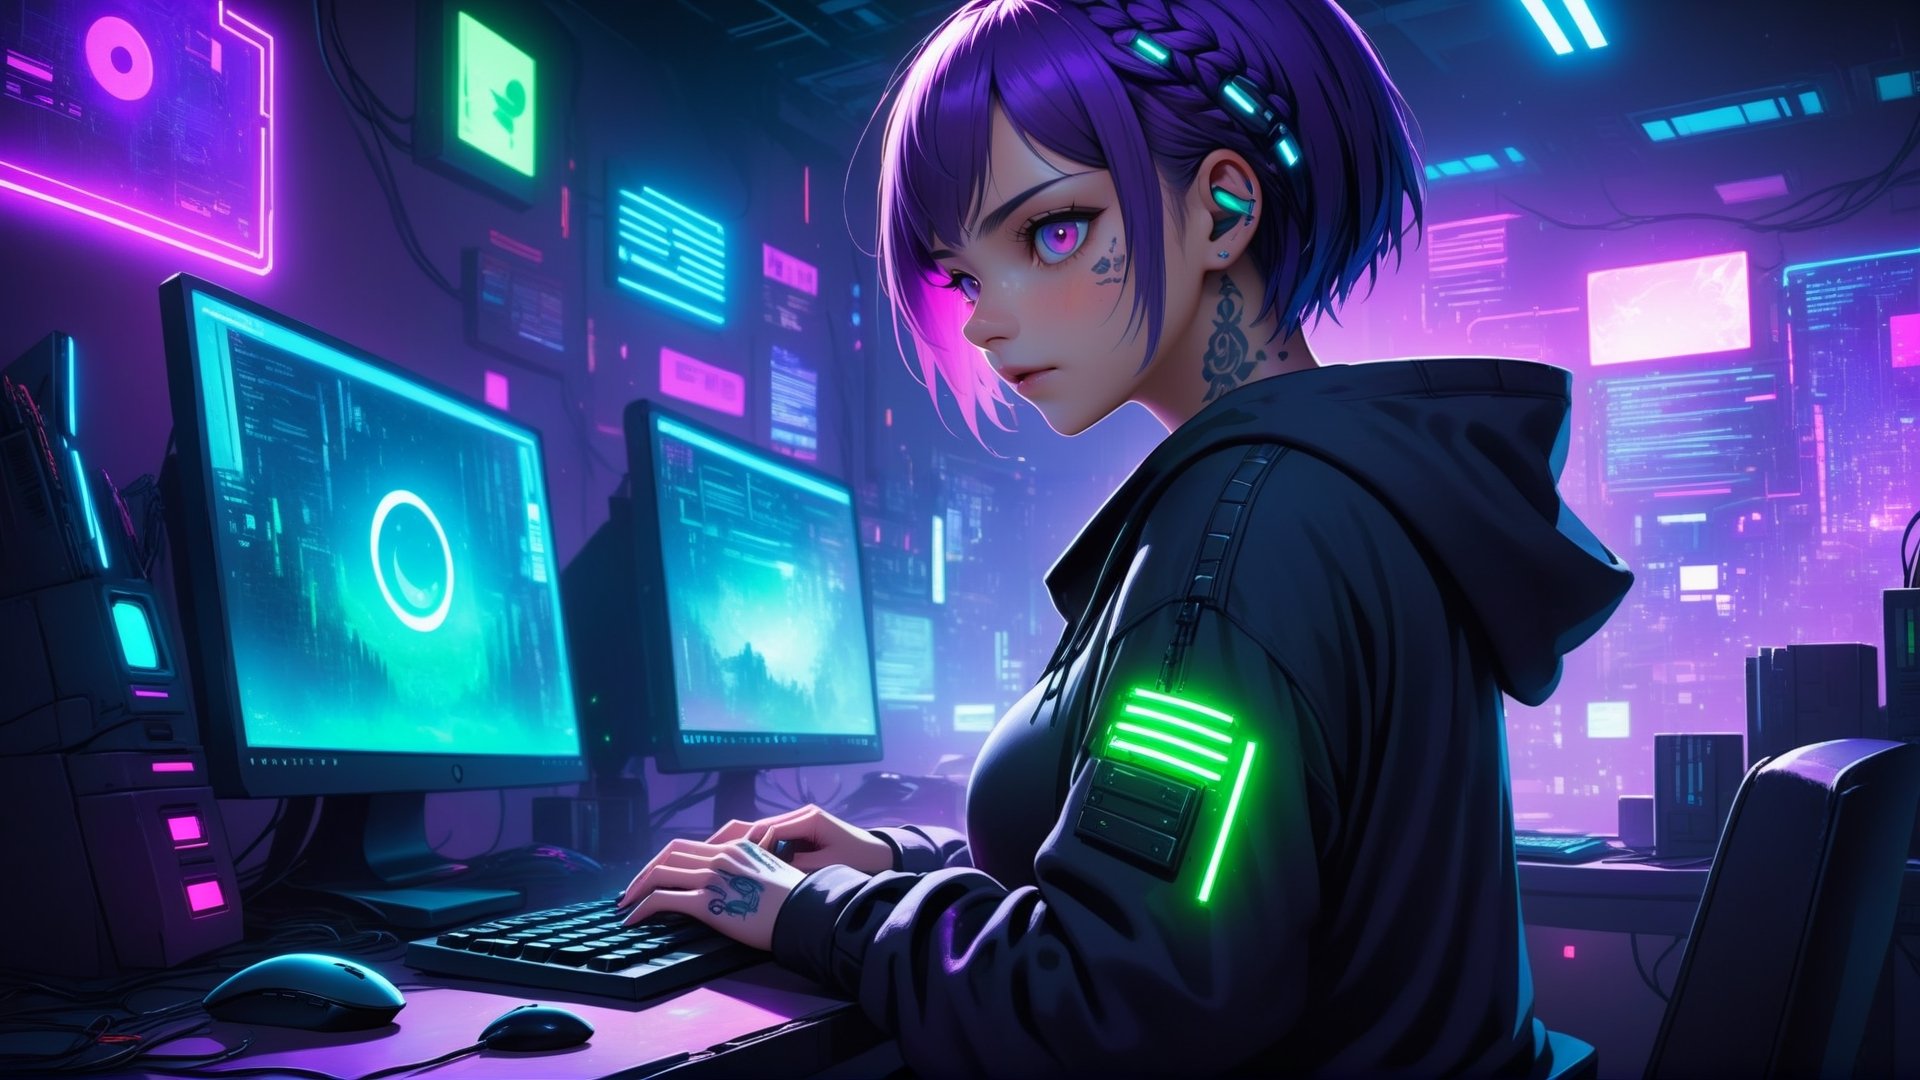 1female,2 hands, sexy eyes, short hair,purple hair with white tufts, short braids, cap, large breasts:1.4, gorgeous breasts, tattoo on neck,electric pink eyes,High detailed ,game room concept,playing at computer,hacking, purple lights, light green lights, profile view,black hoodie,hood raised with hair visible,soft lights, window city lights background, night_time outside,night_sky, planets,stars, dark atmosphere, cyberpunk room, cyberpunk lights,neck tattoo,
,Futuristic room, left hand on keyboard, right hand on mouse,anime